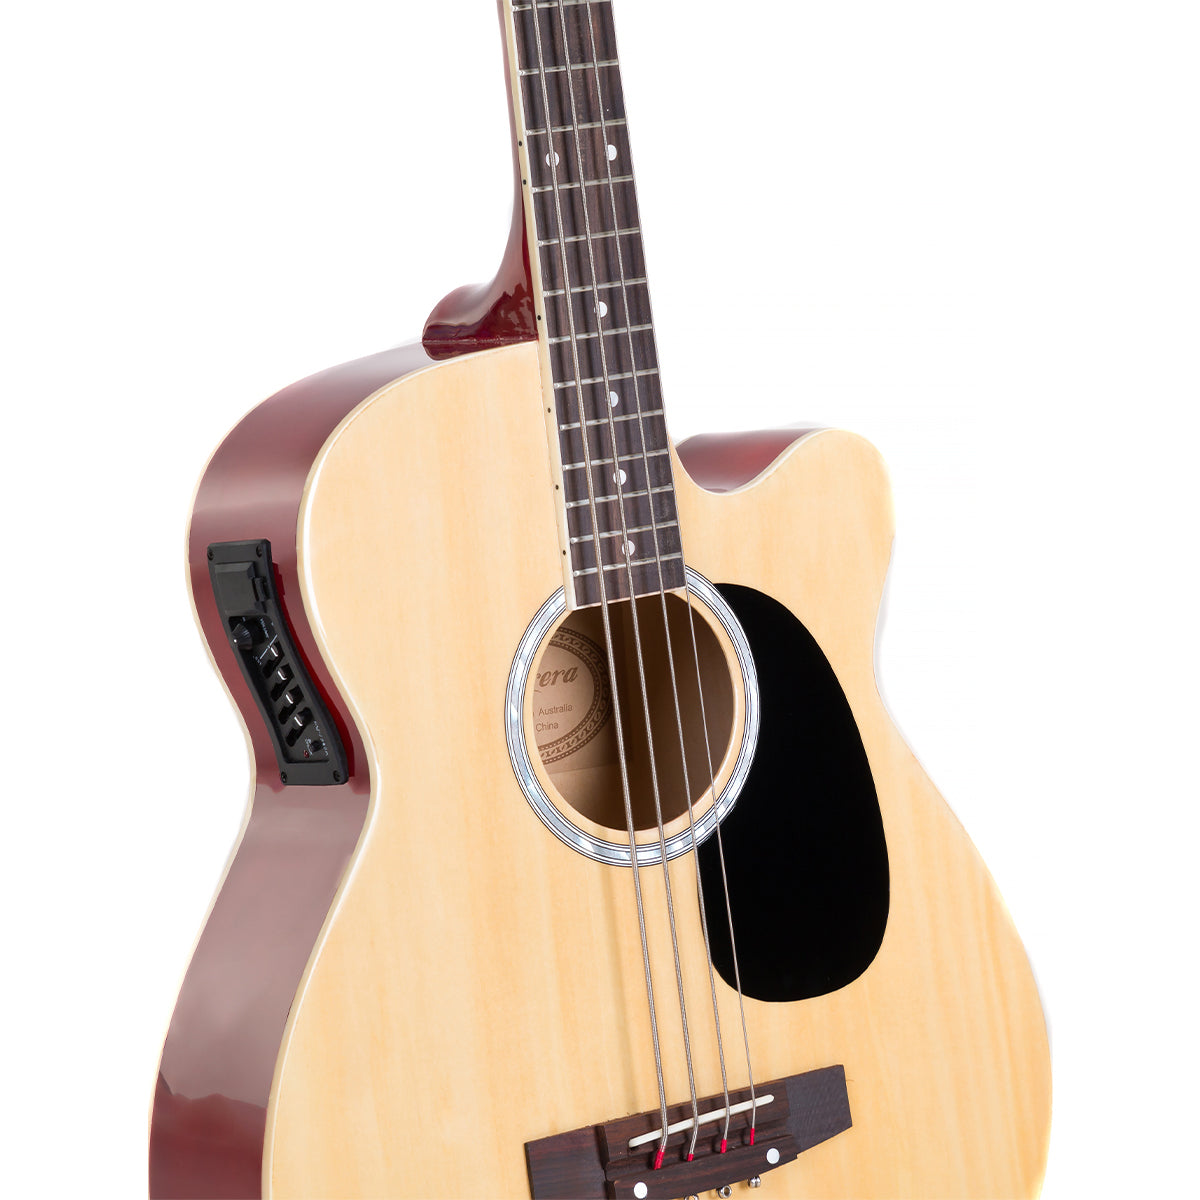 Karrera 43in Acoustic Bass Guitar with electric pickup   - Natural - SILBERSHELL